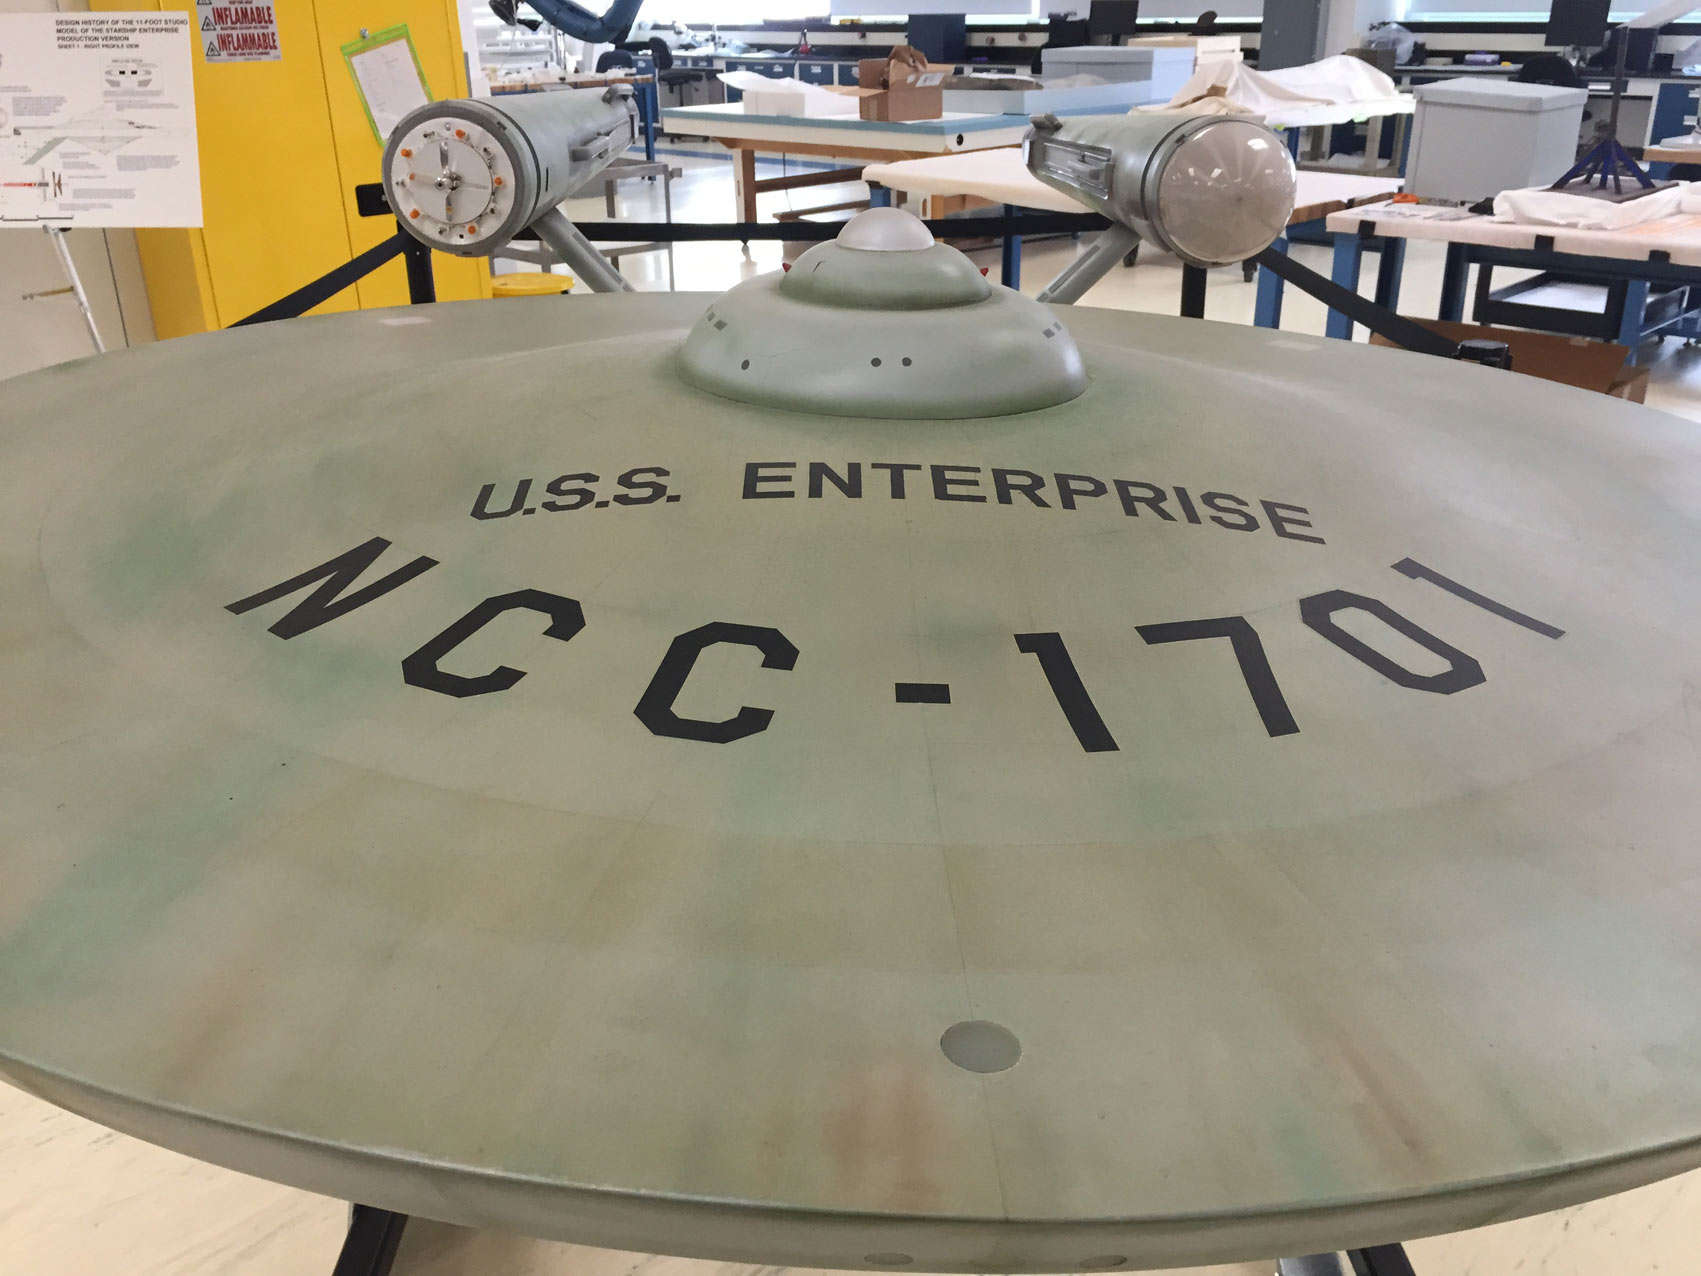 The saucer section of the original USS Enterprise model from the "Star Trek" original series, being conserved at the Smithsonian National Air and Space Museum's Udvar-Hazy Center. Credit: Phil Plait